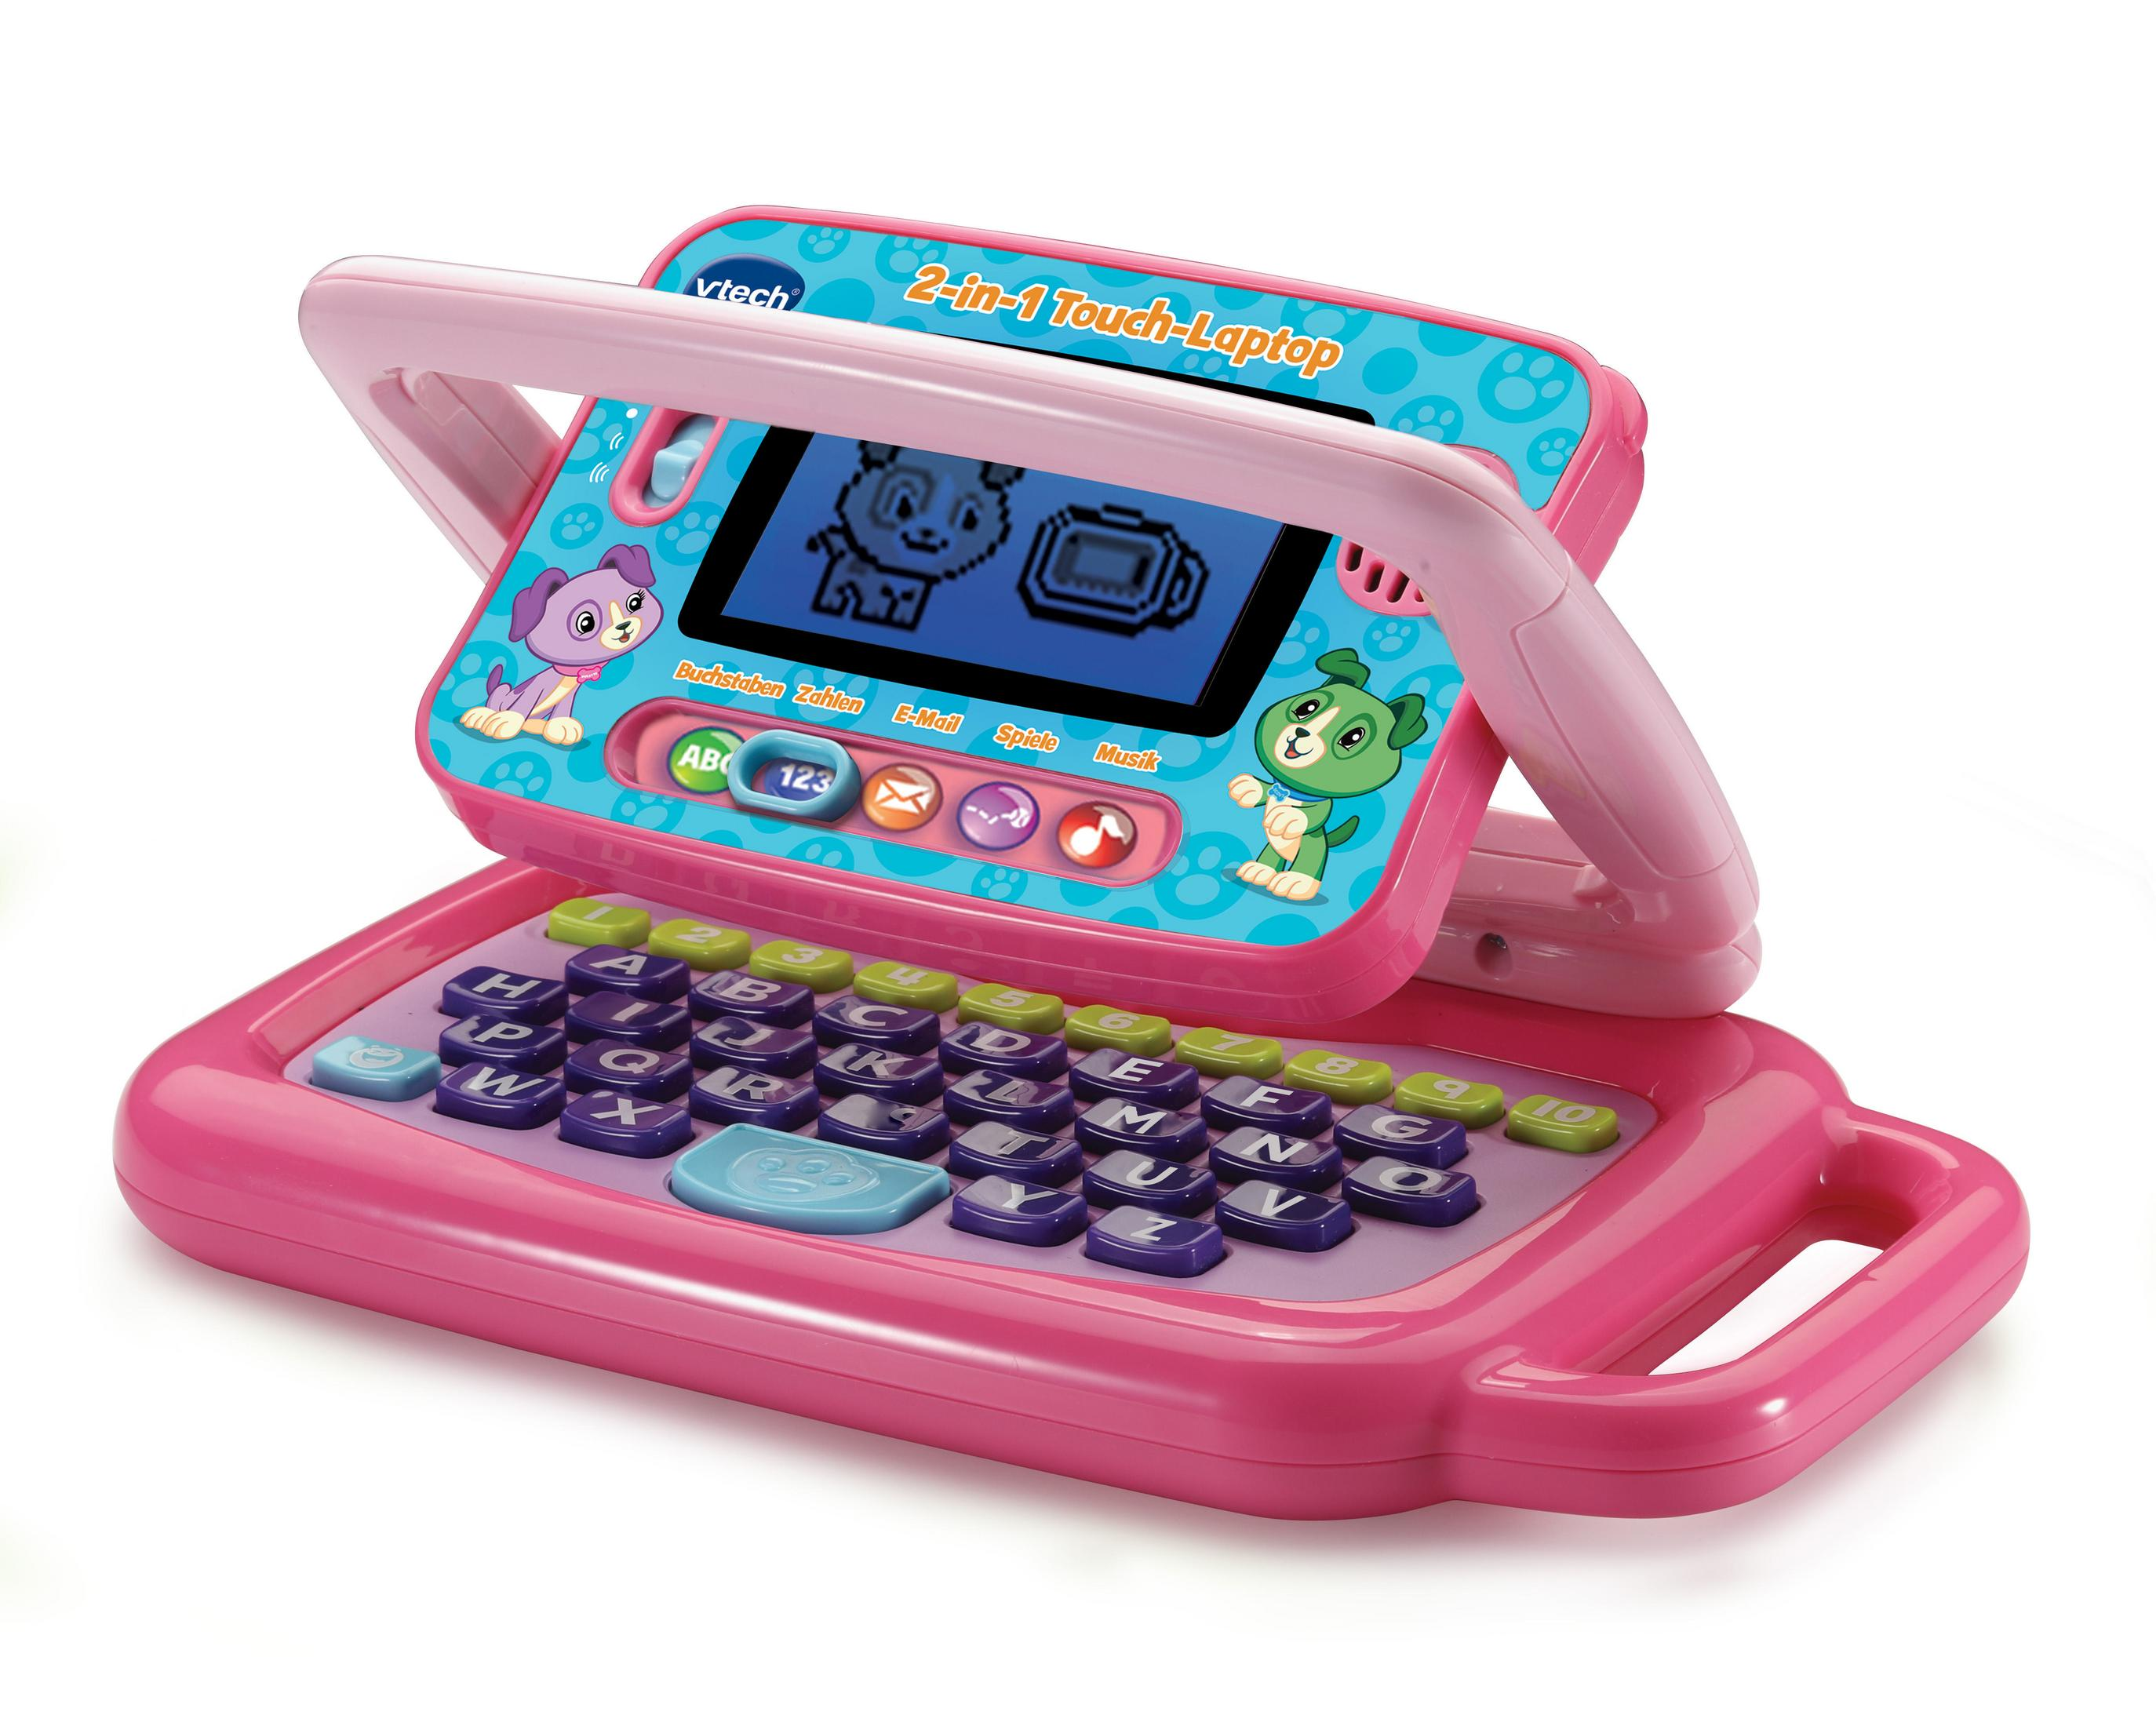 80-600954 PINK TOUCH-LAPTOP 2-IN-1 VTECH Mehrfarbig Lernlaptop,